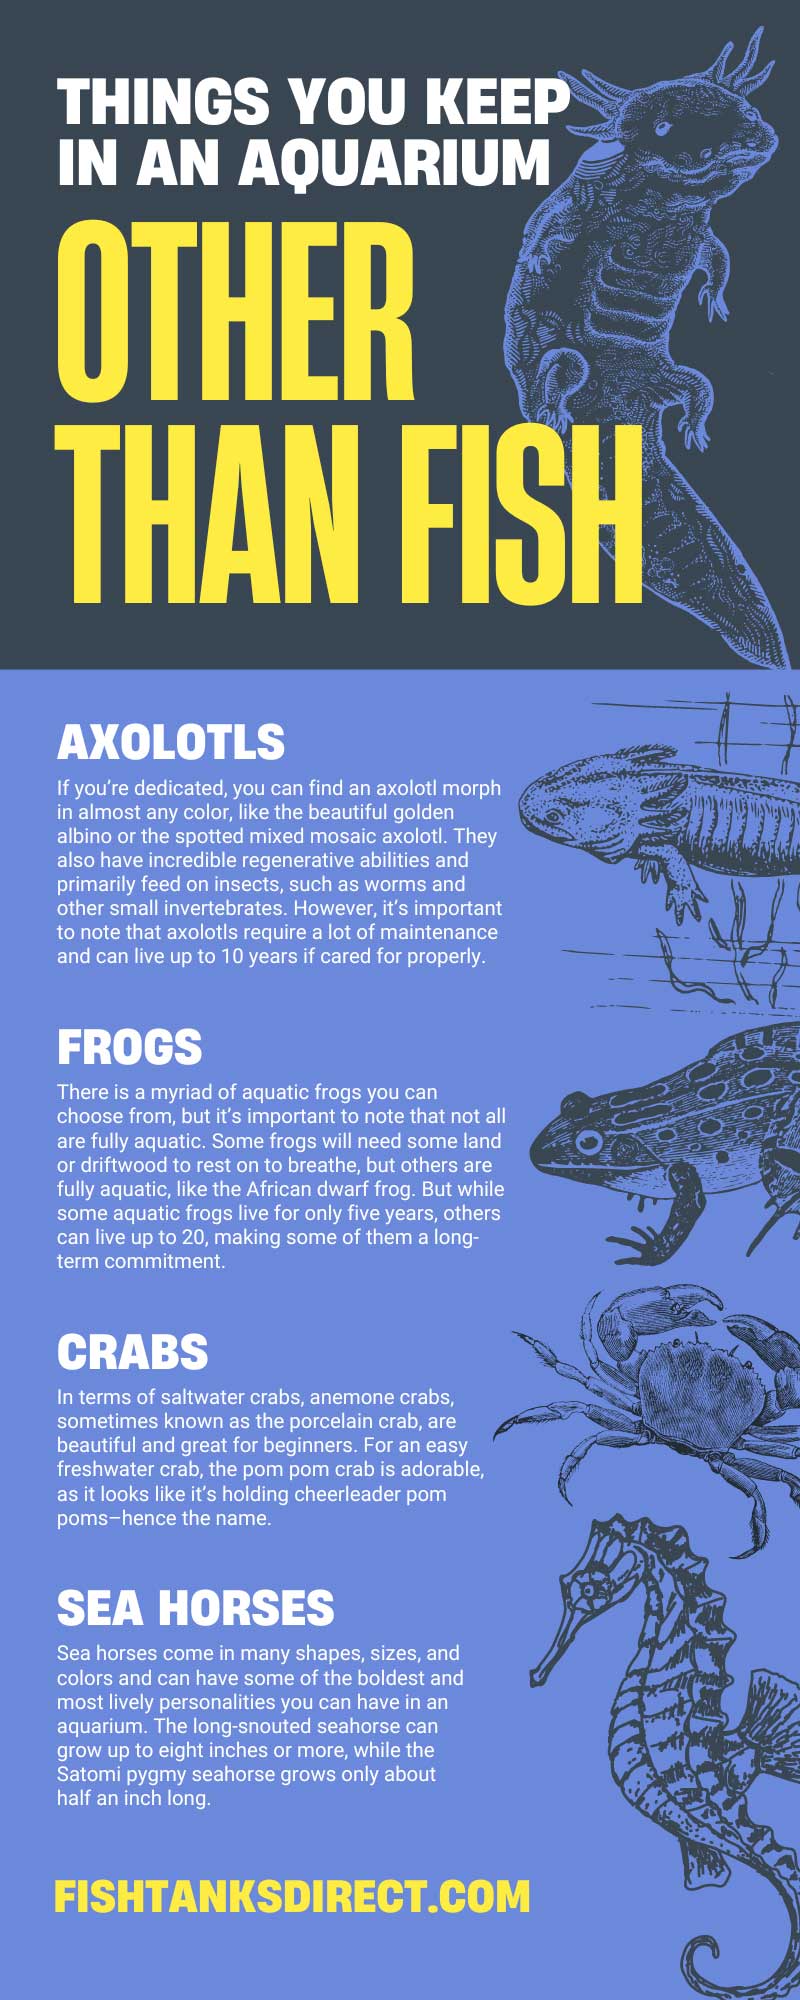 Things You Keep in an Aquarium Other Than Fish